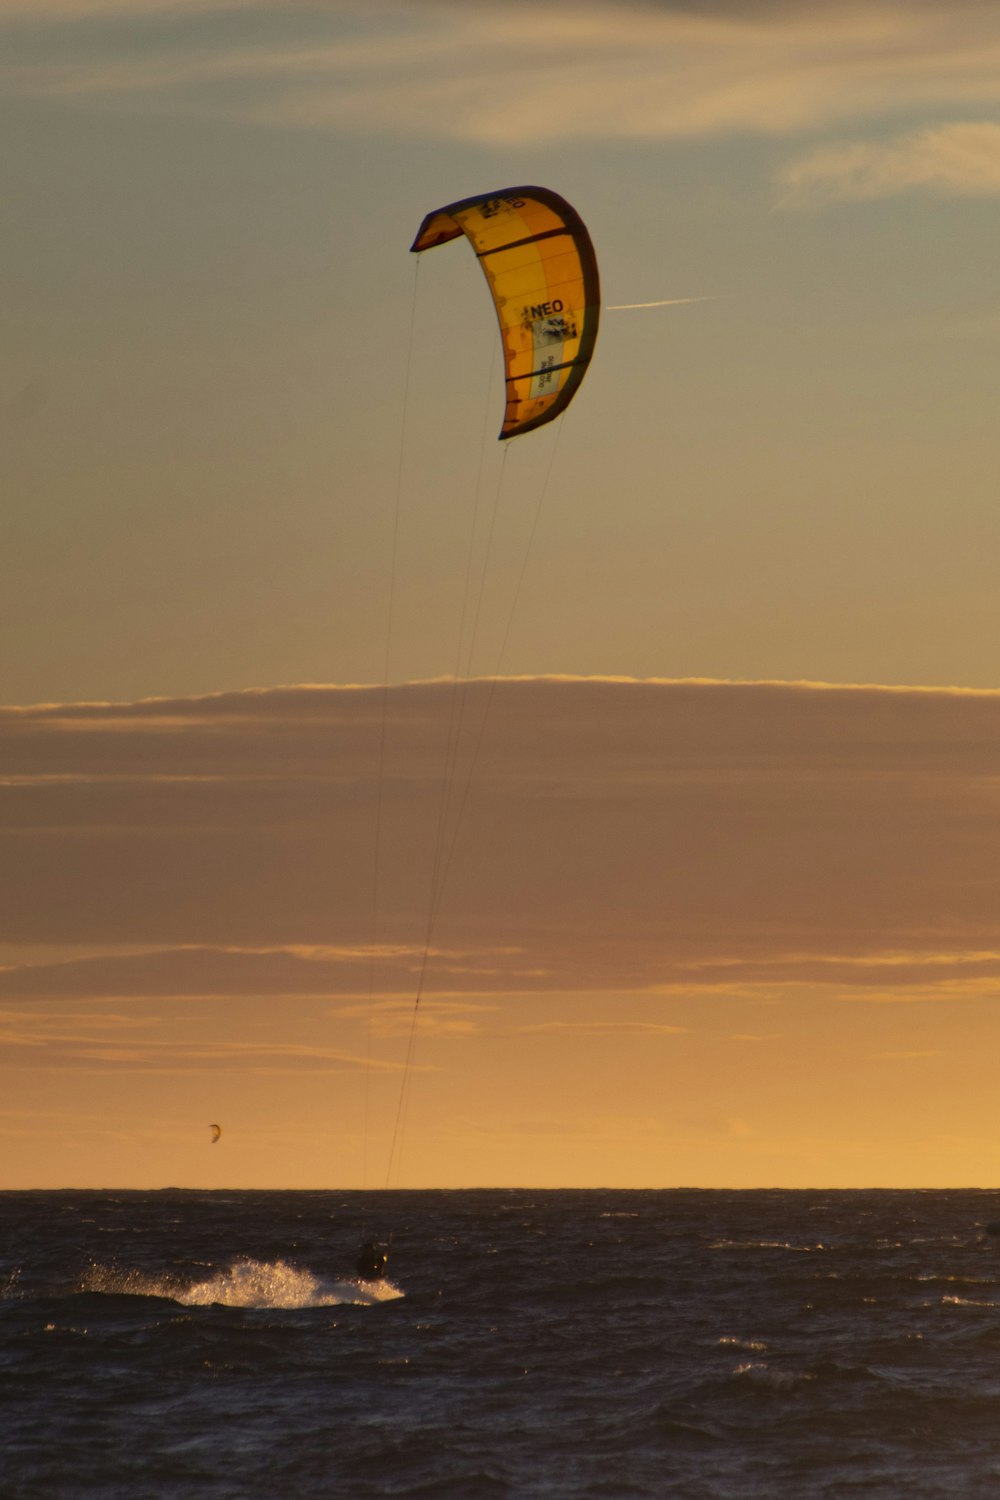 a person parasailing on the ocean